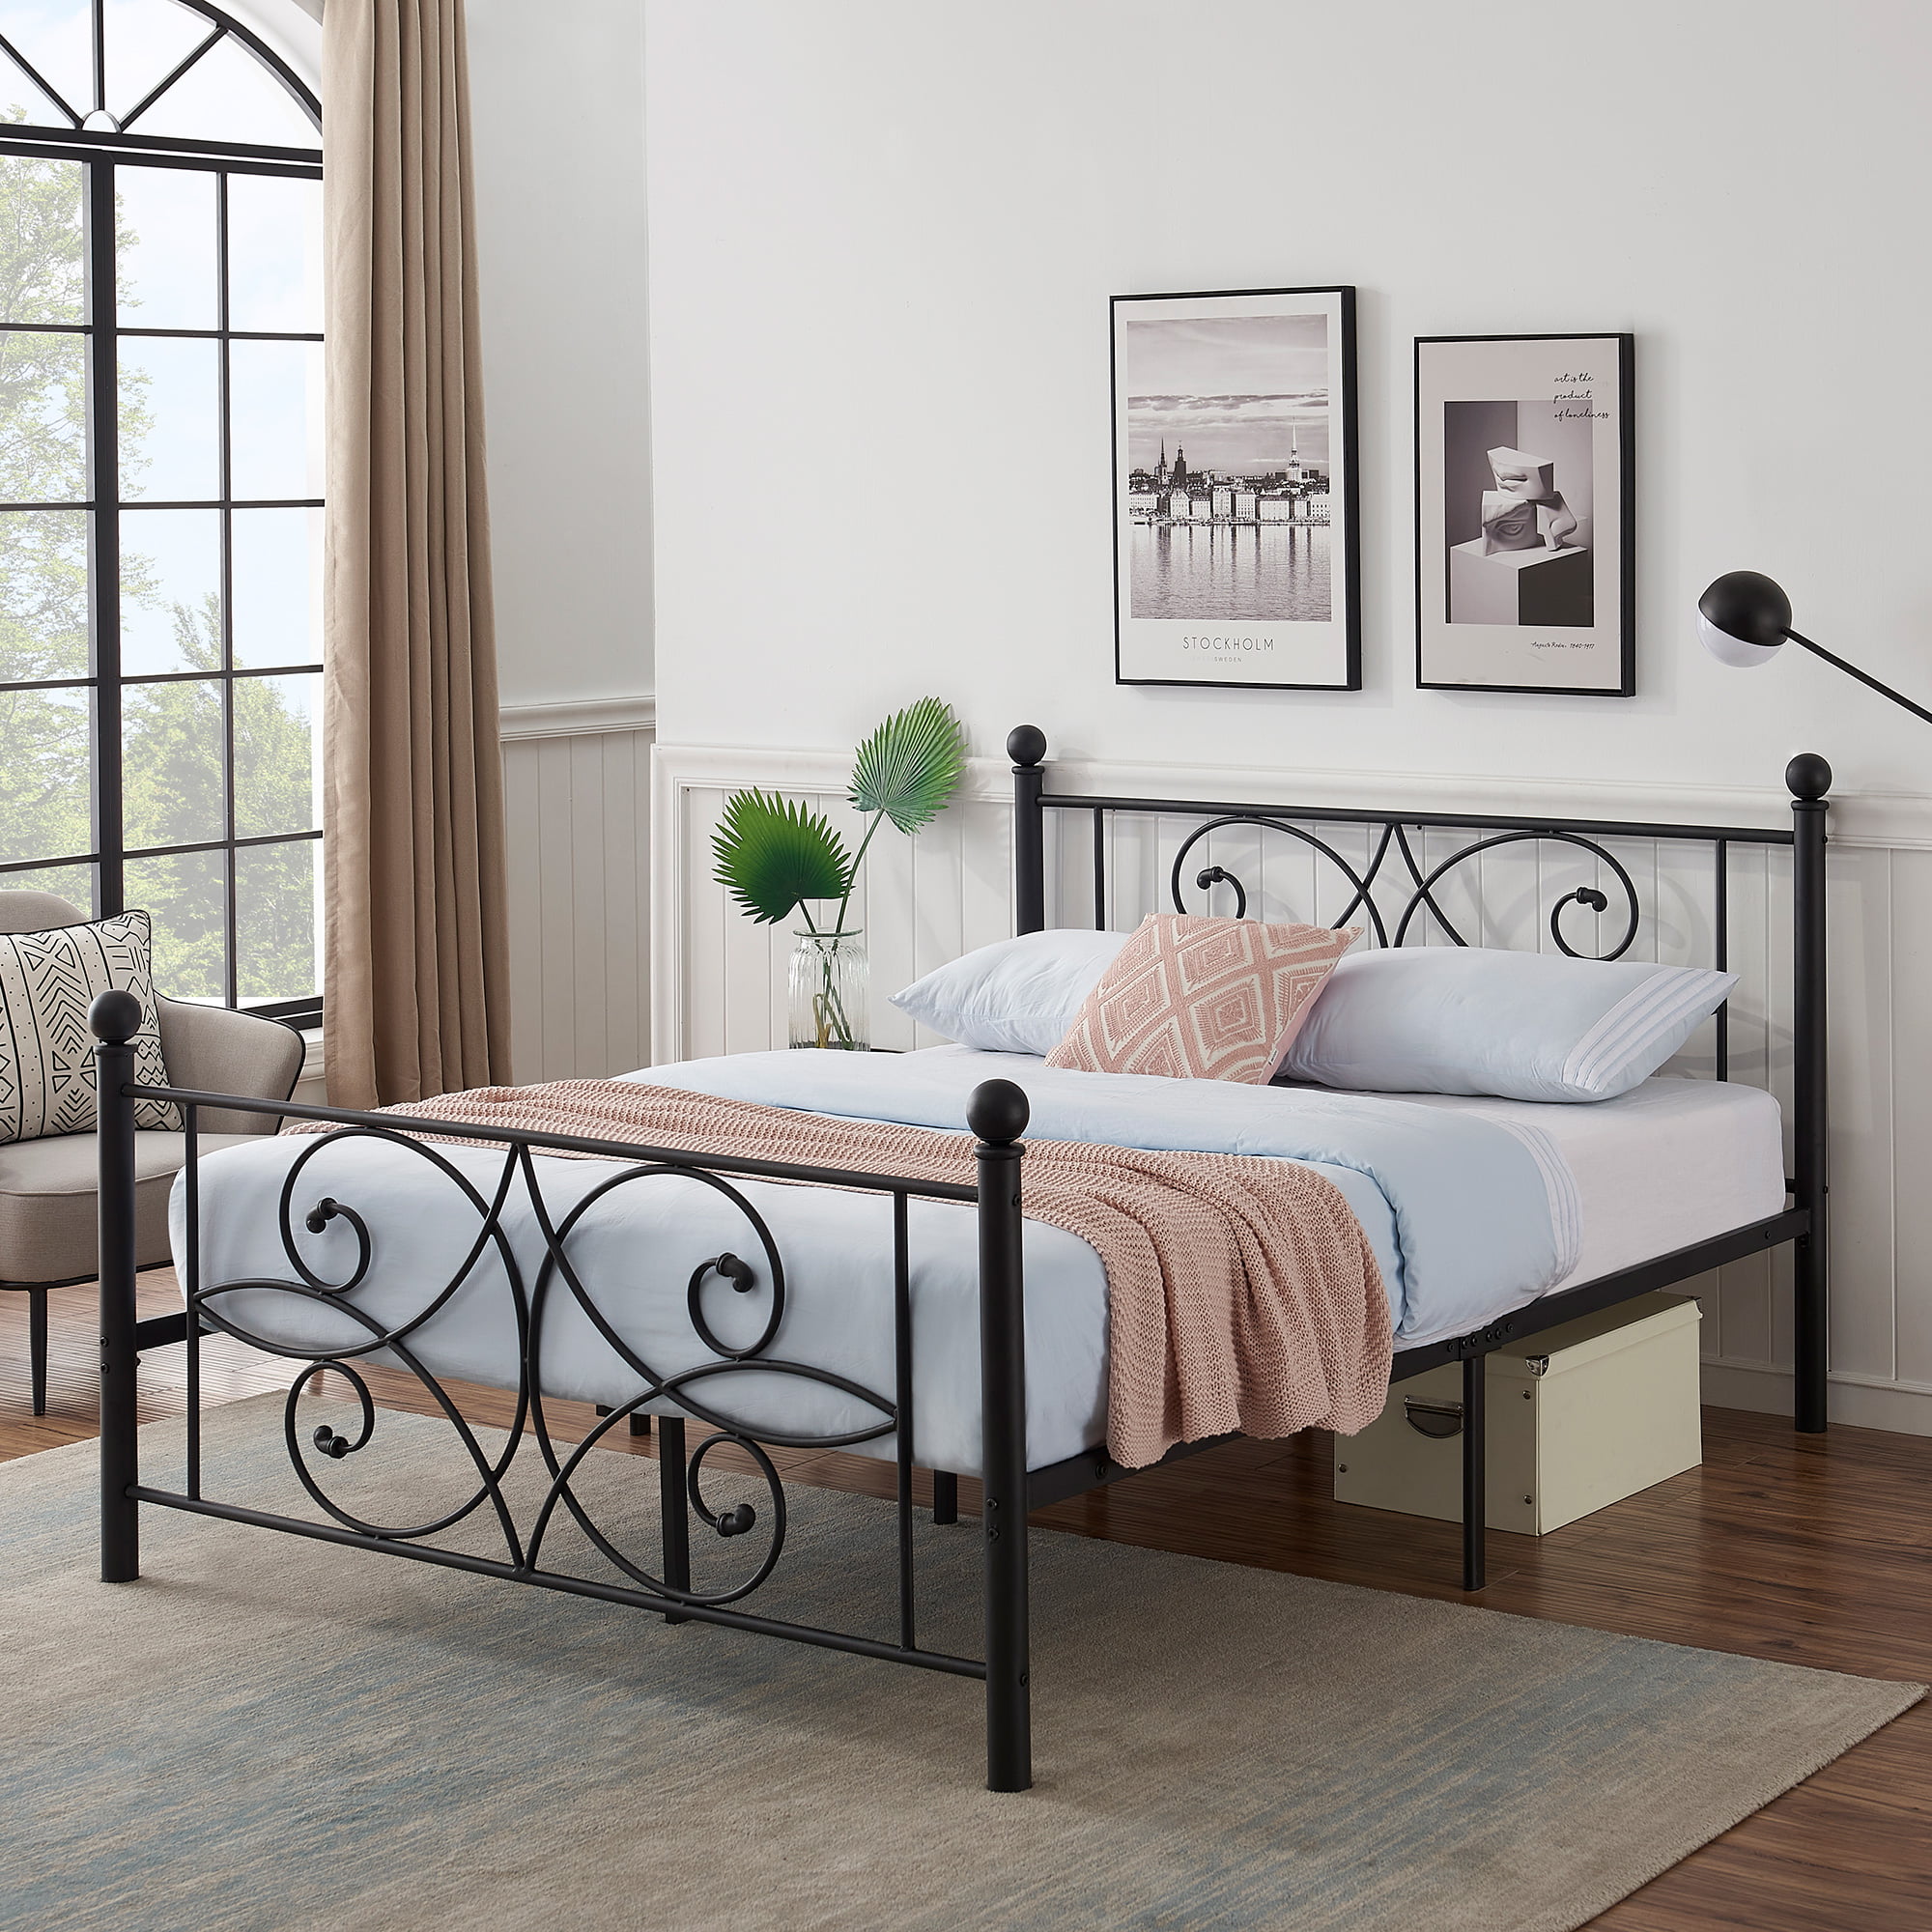 Minimalist Metal Bed Frames For A Modern Look